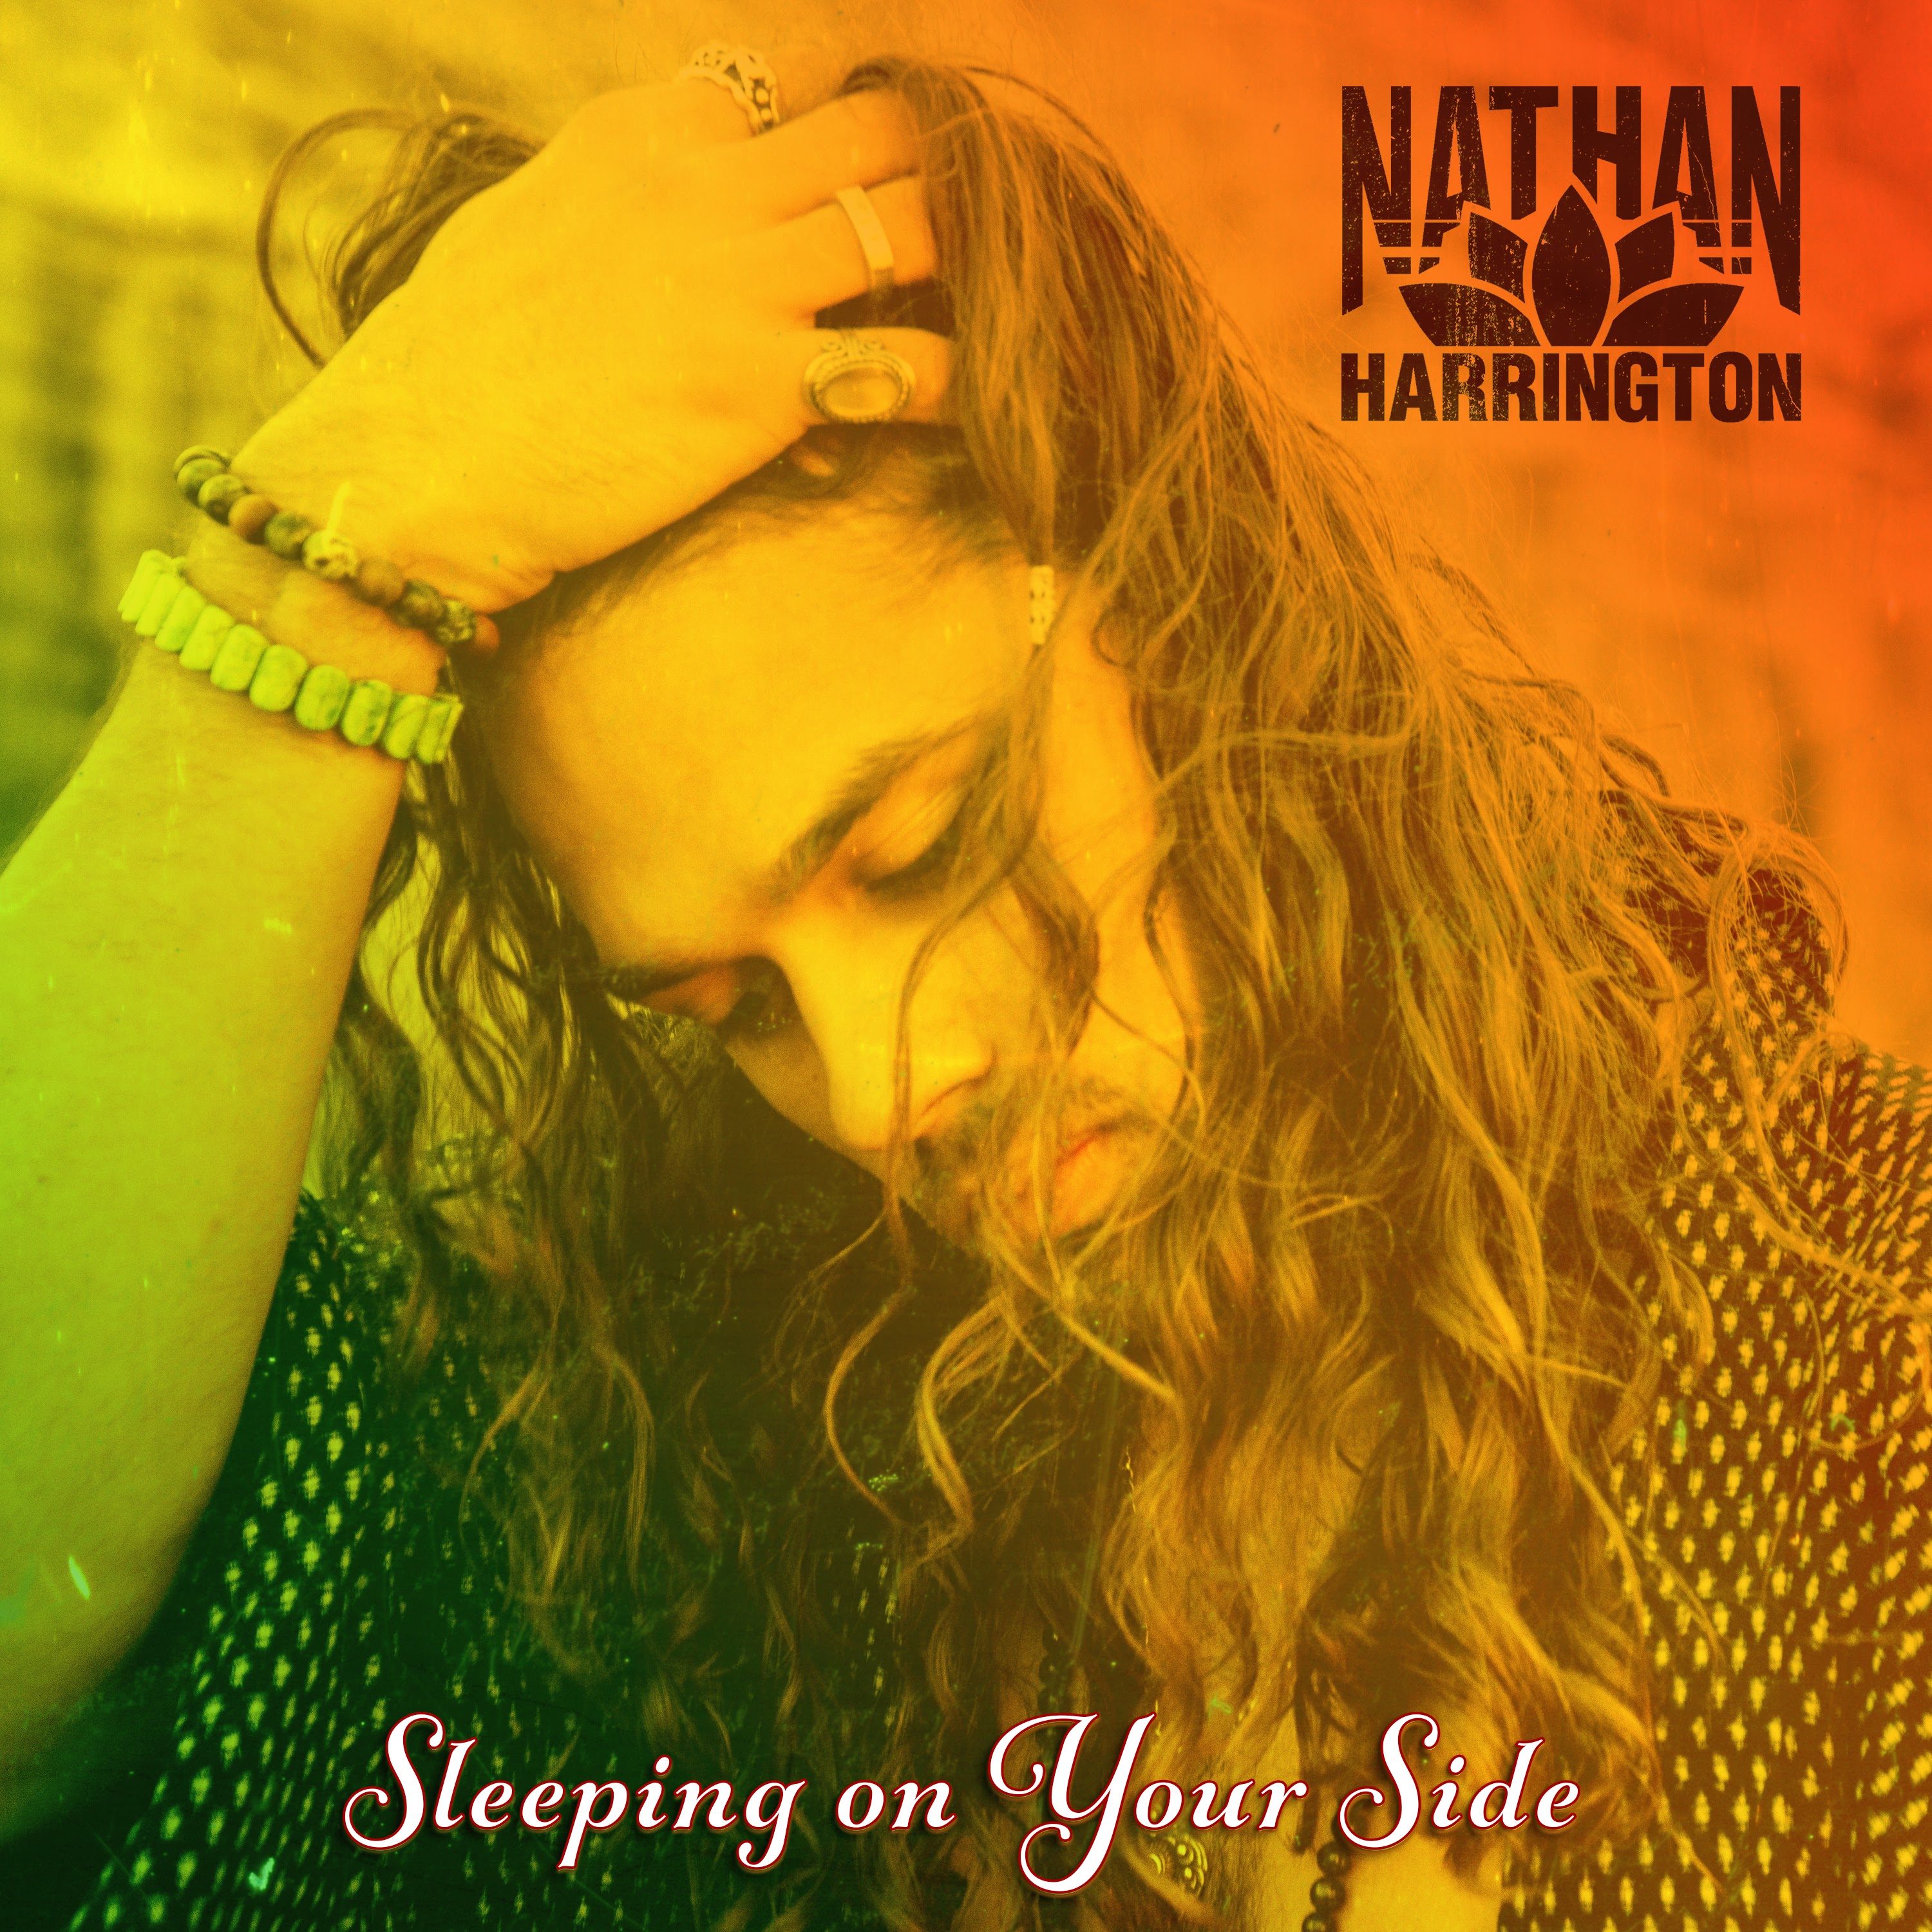 Nathan Harrington releases 'Sleeping on Your Side'